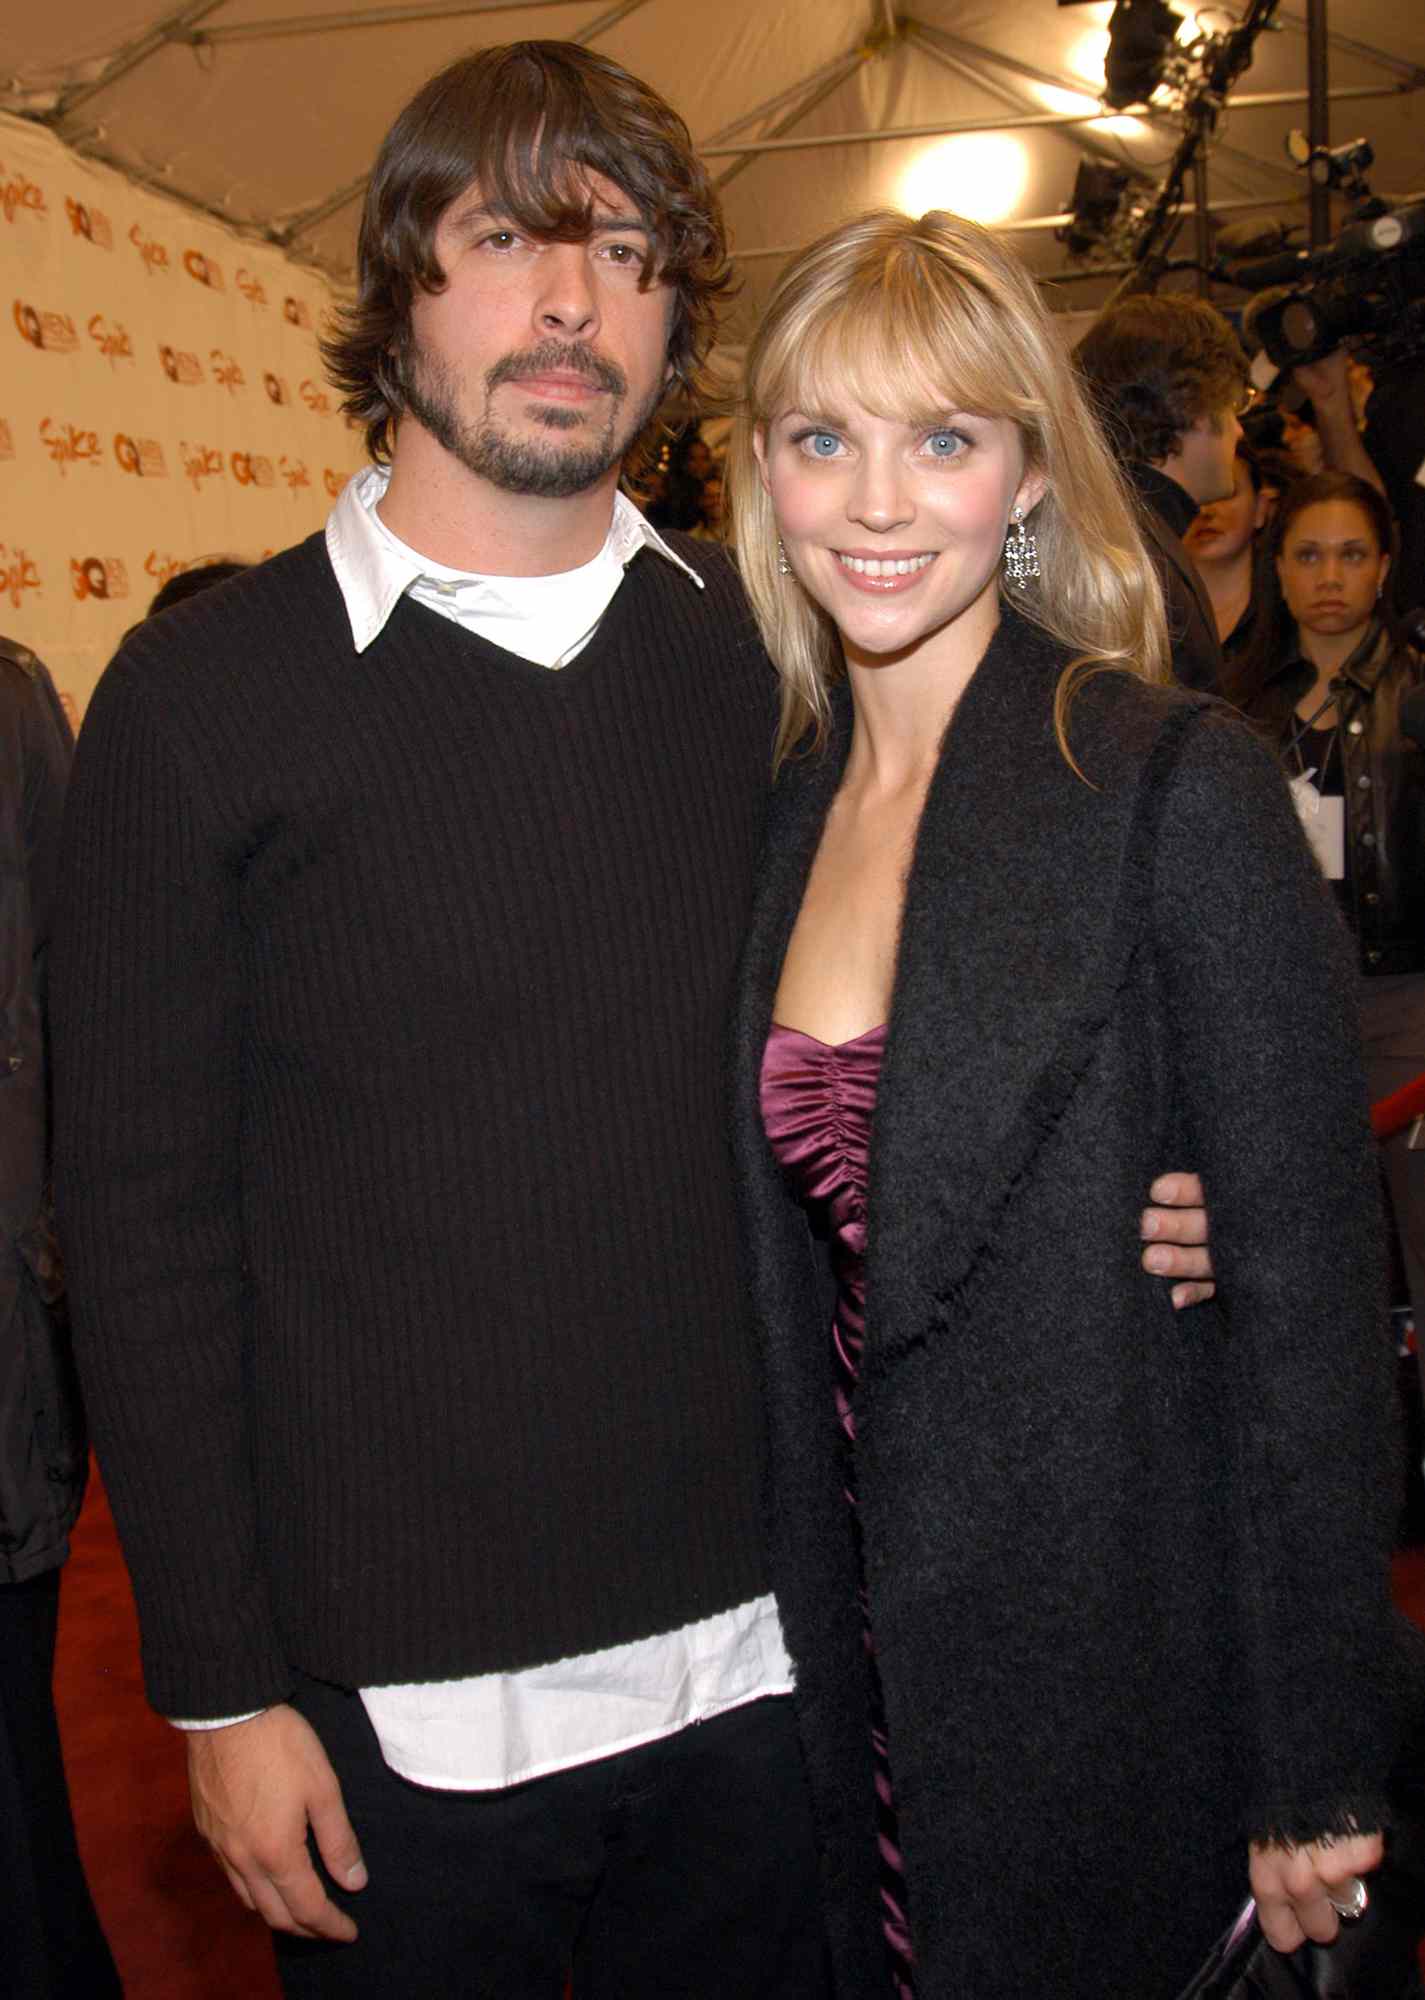 Dave Grohl of Foo Fighters and wife Jordyn Blum during Spike TV Presents the 2003 GQ Men of the Year Awards - Red Carpet at The Regent Wall Street in New York City, New York, United States